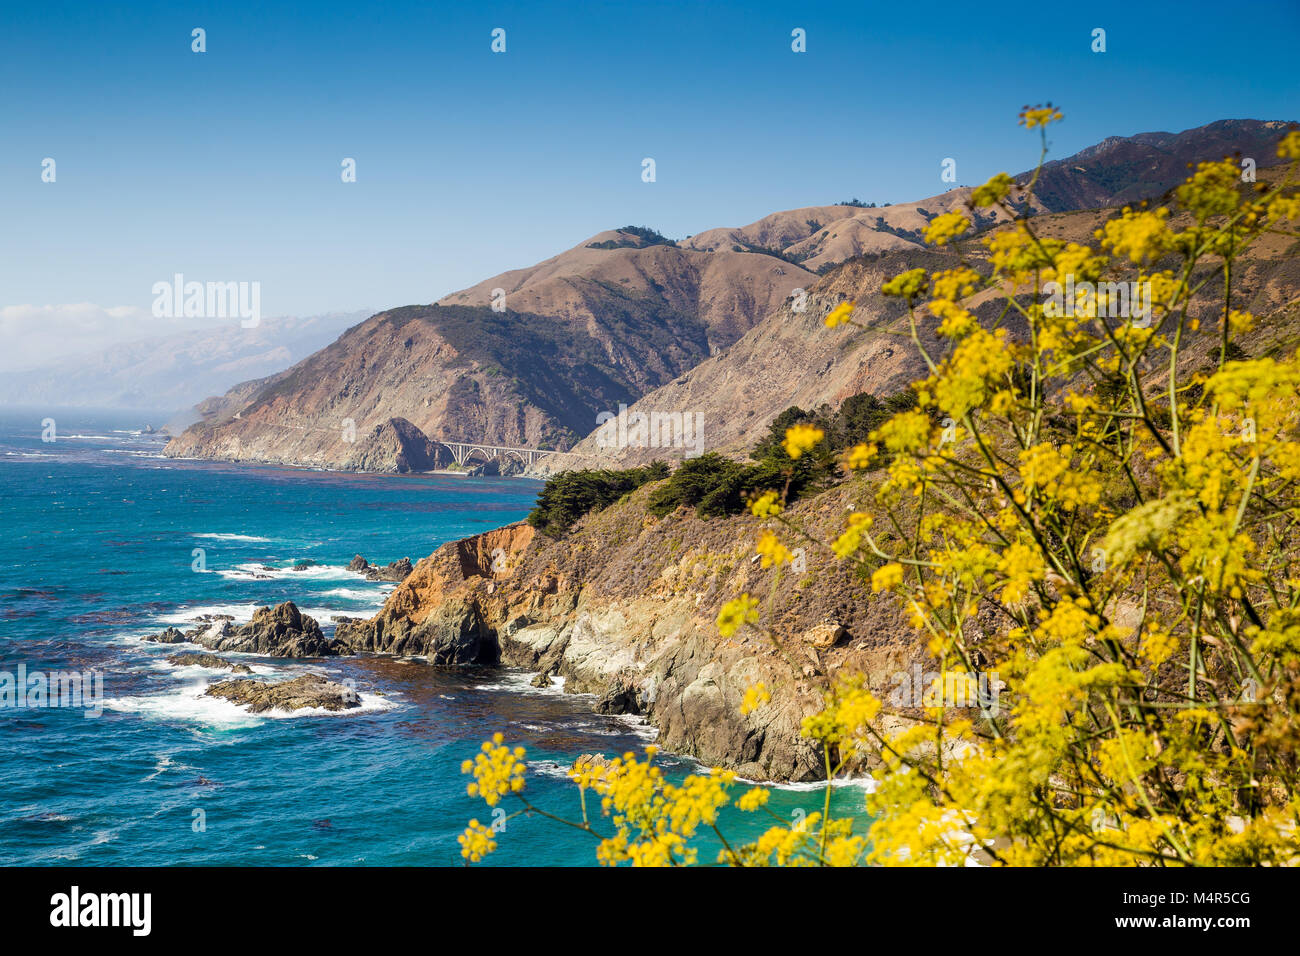 Scenic view of the rugged coastline of Big Sur with Santa Lucia Mountains and Big Creek Bridge along famous Highway 1 at sunset, California, USA Stock Photo